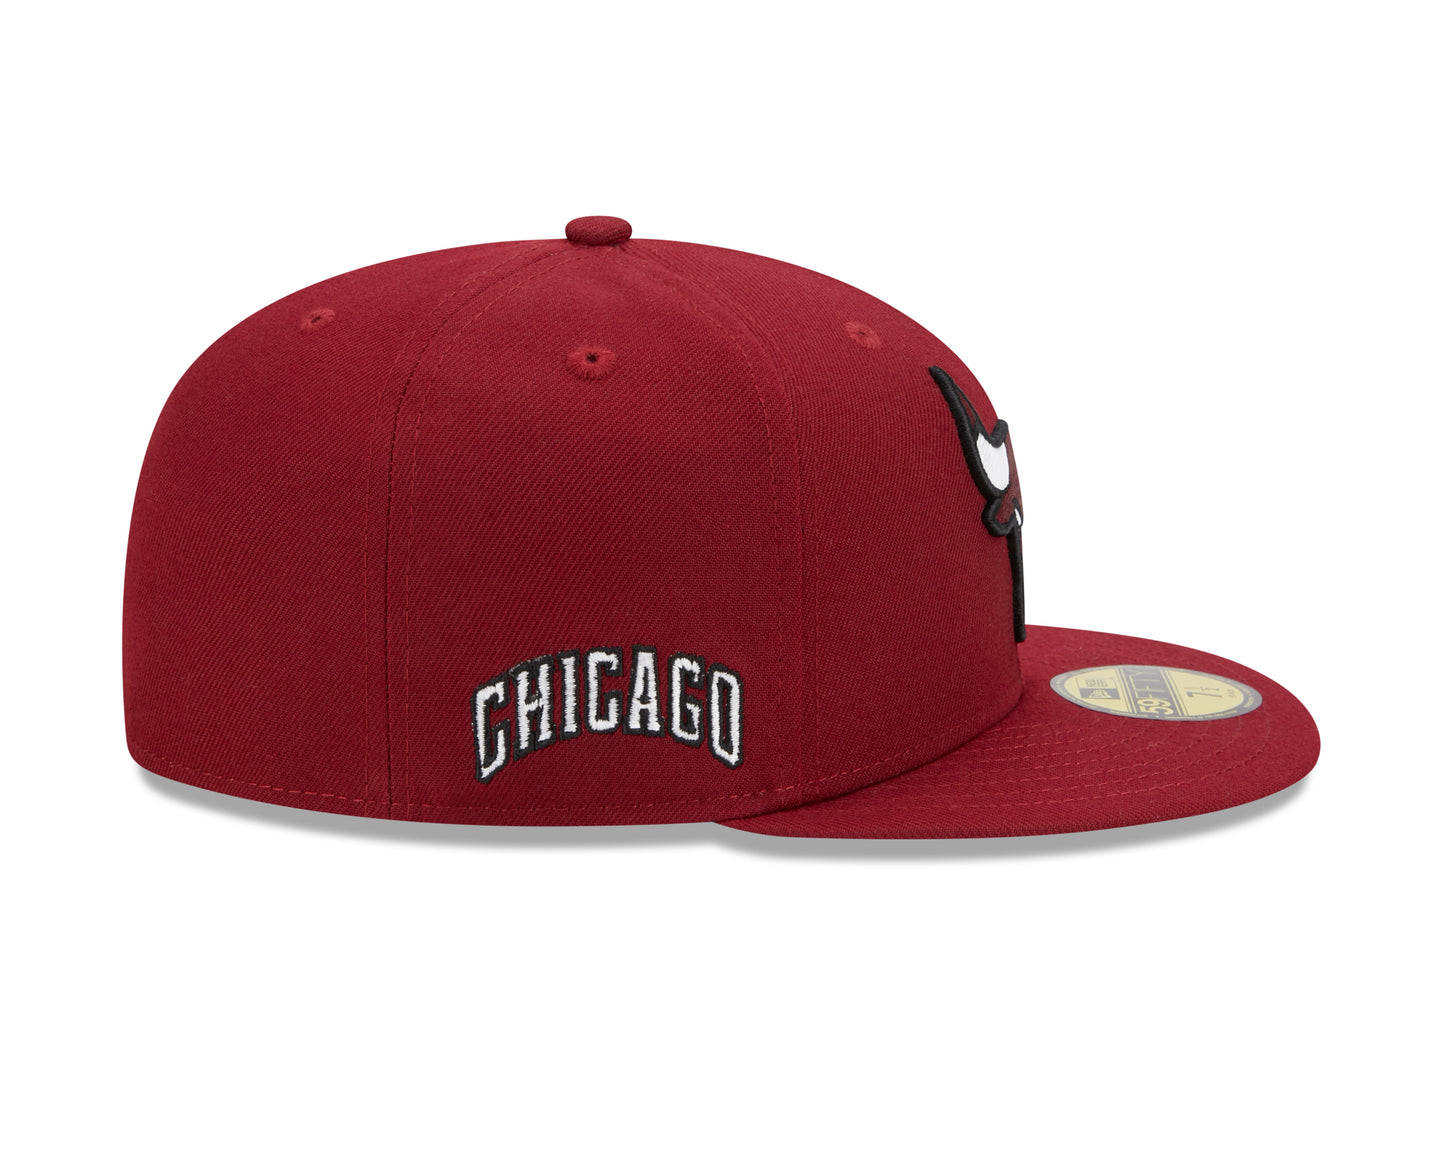 Chicago Bulls New Era Alternate City Edition 59FIFTY Fitted Hat - Dark Red